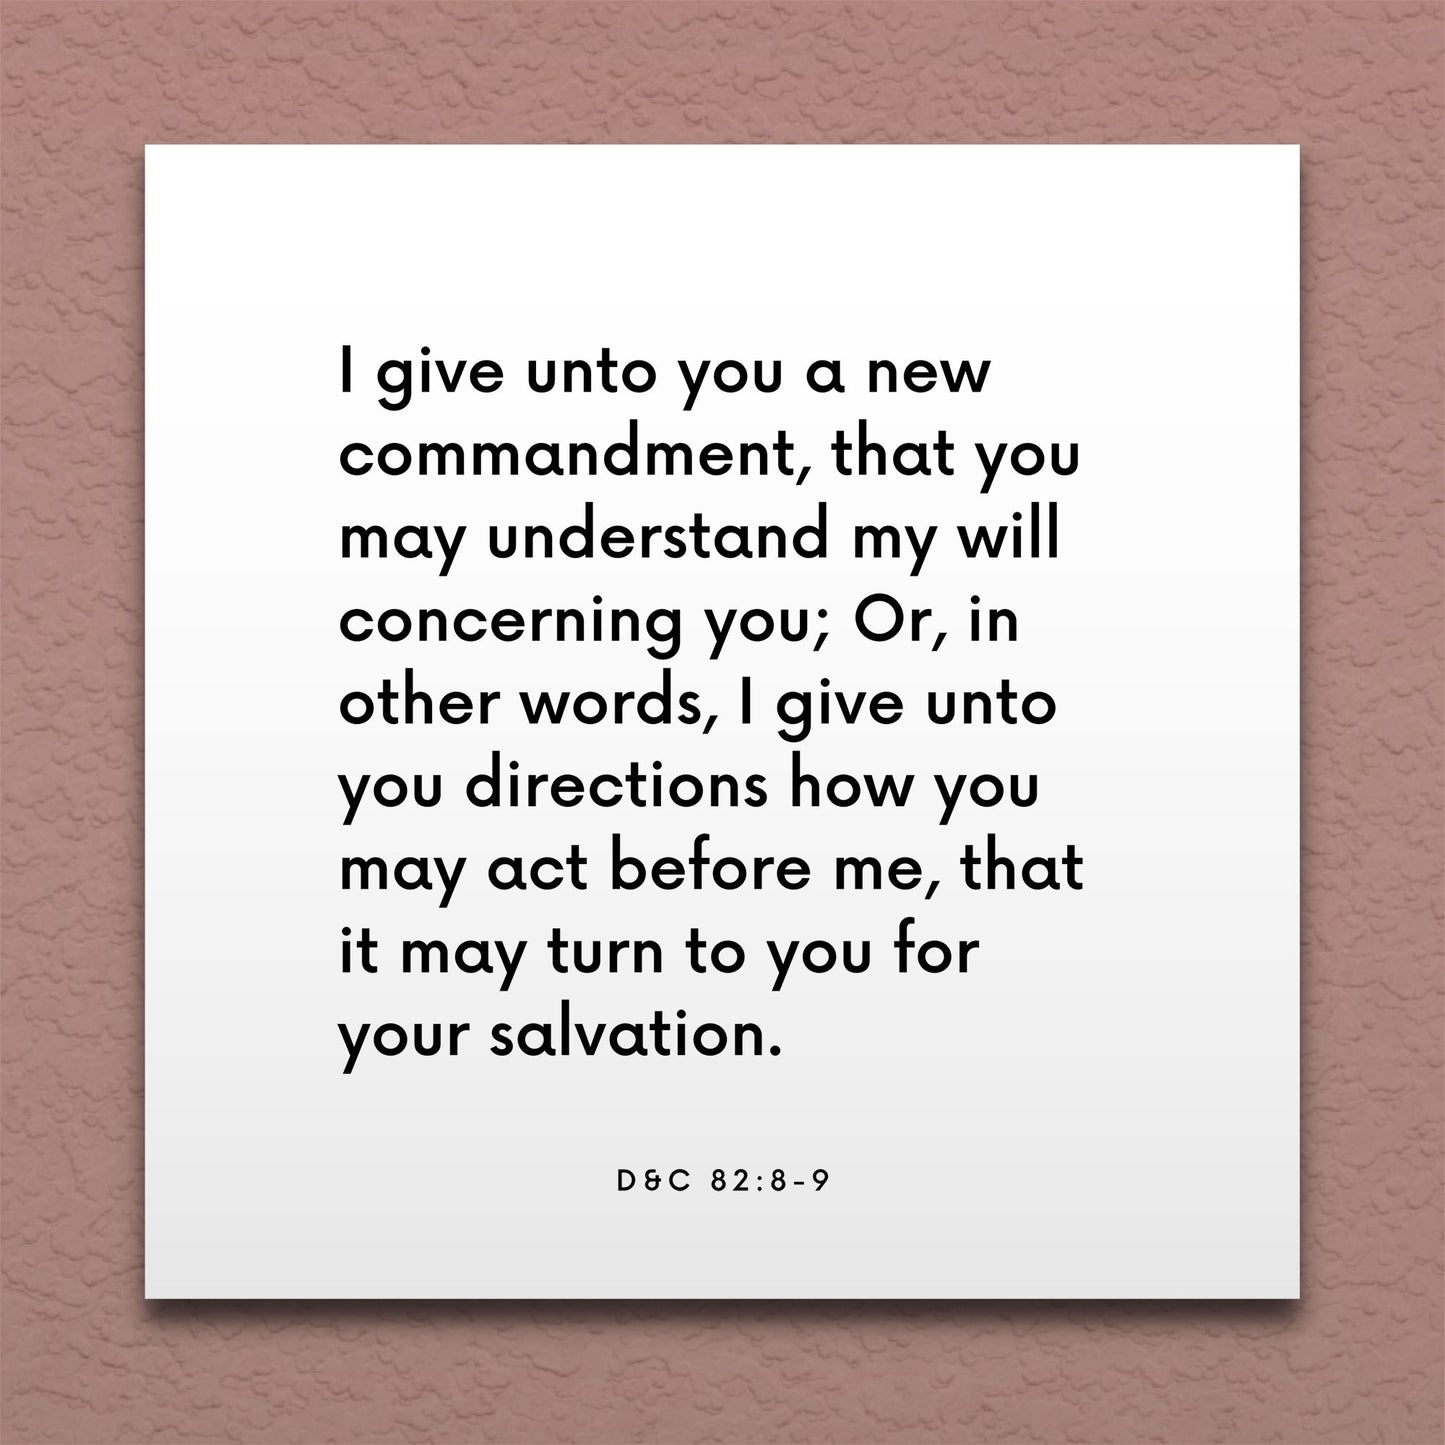 Wall-mounted scripture tile for D&C 82:8-9 - "In other words, I give unto you directions"